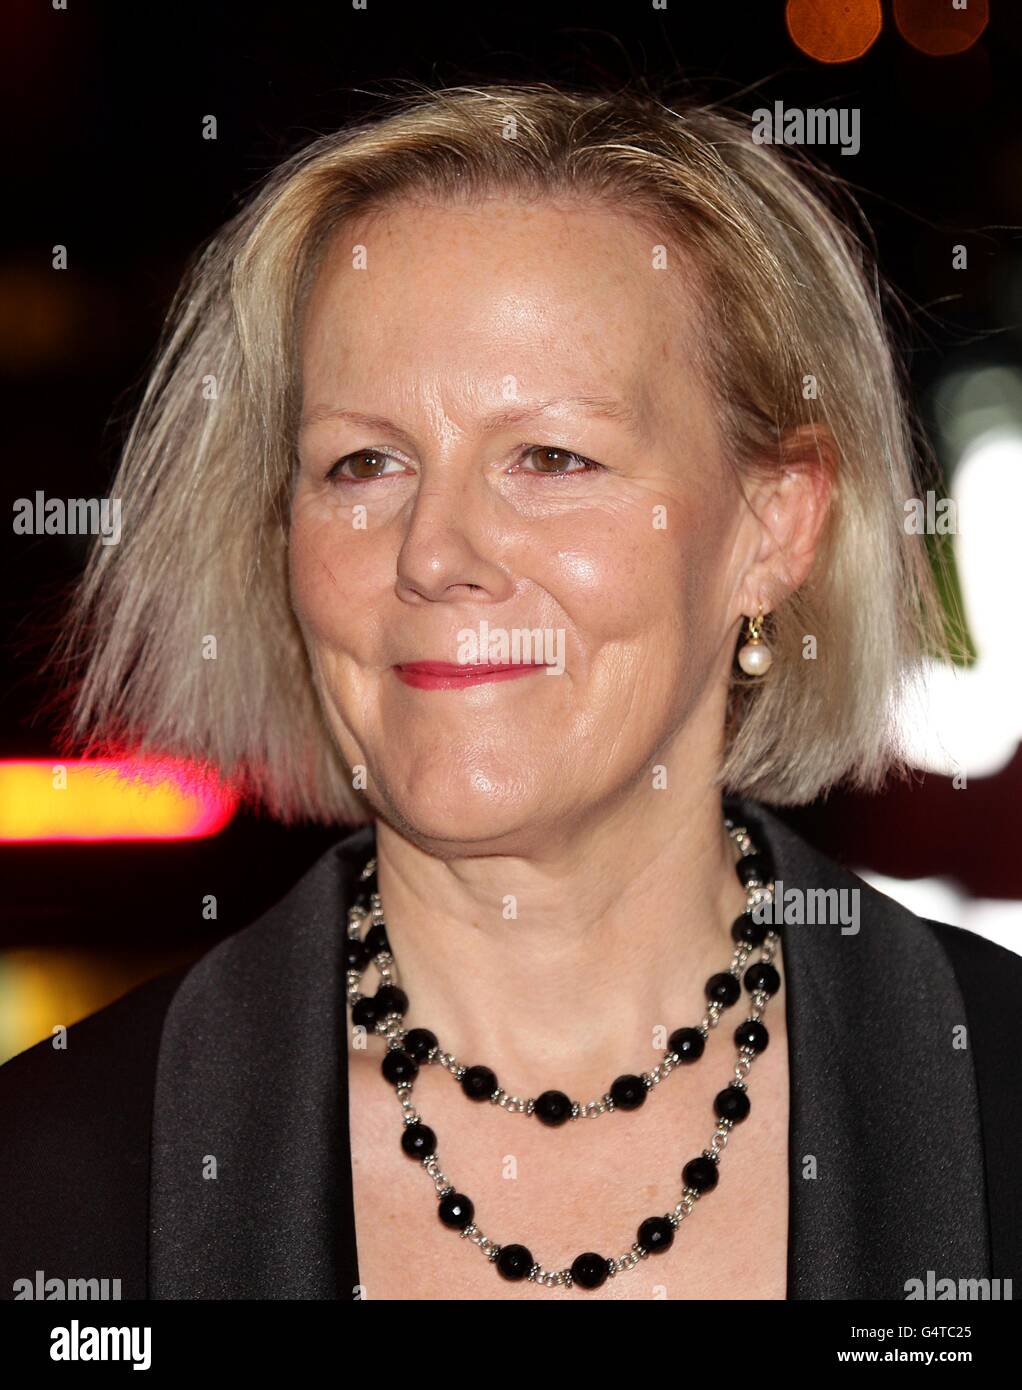 Phyllida Lloyd arriving at the European Premiere of The Iron Lady, at the BFI Southbank, Belvedere Road, London. Stock Photo